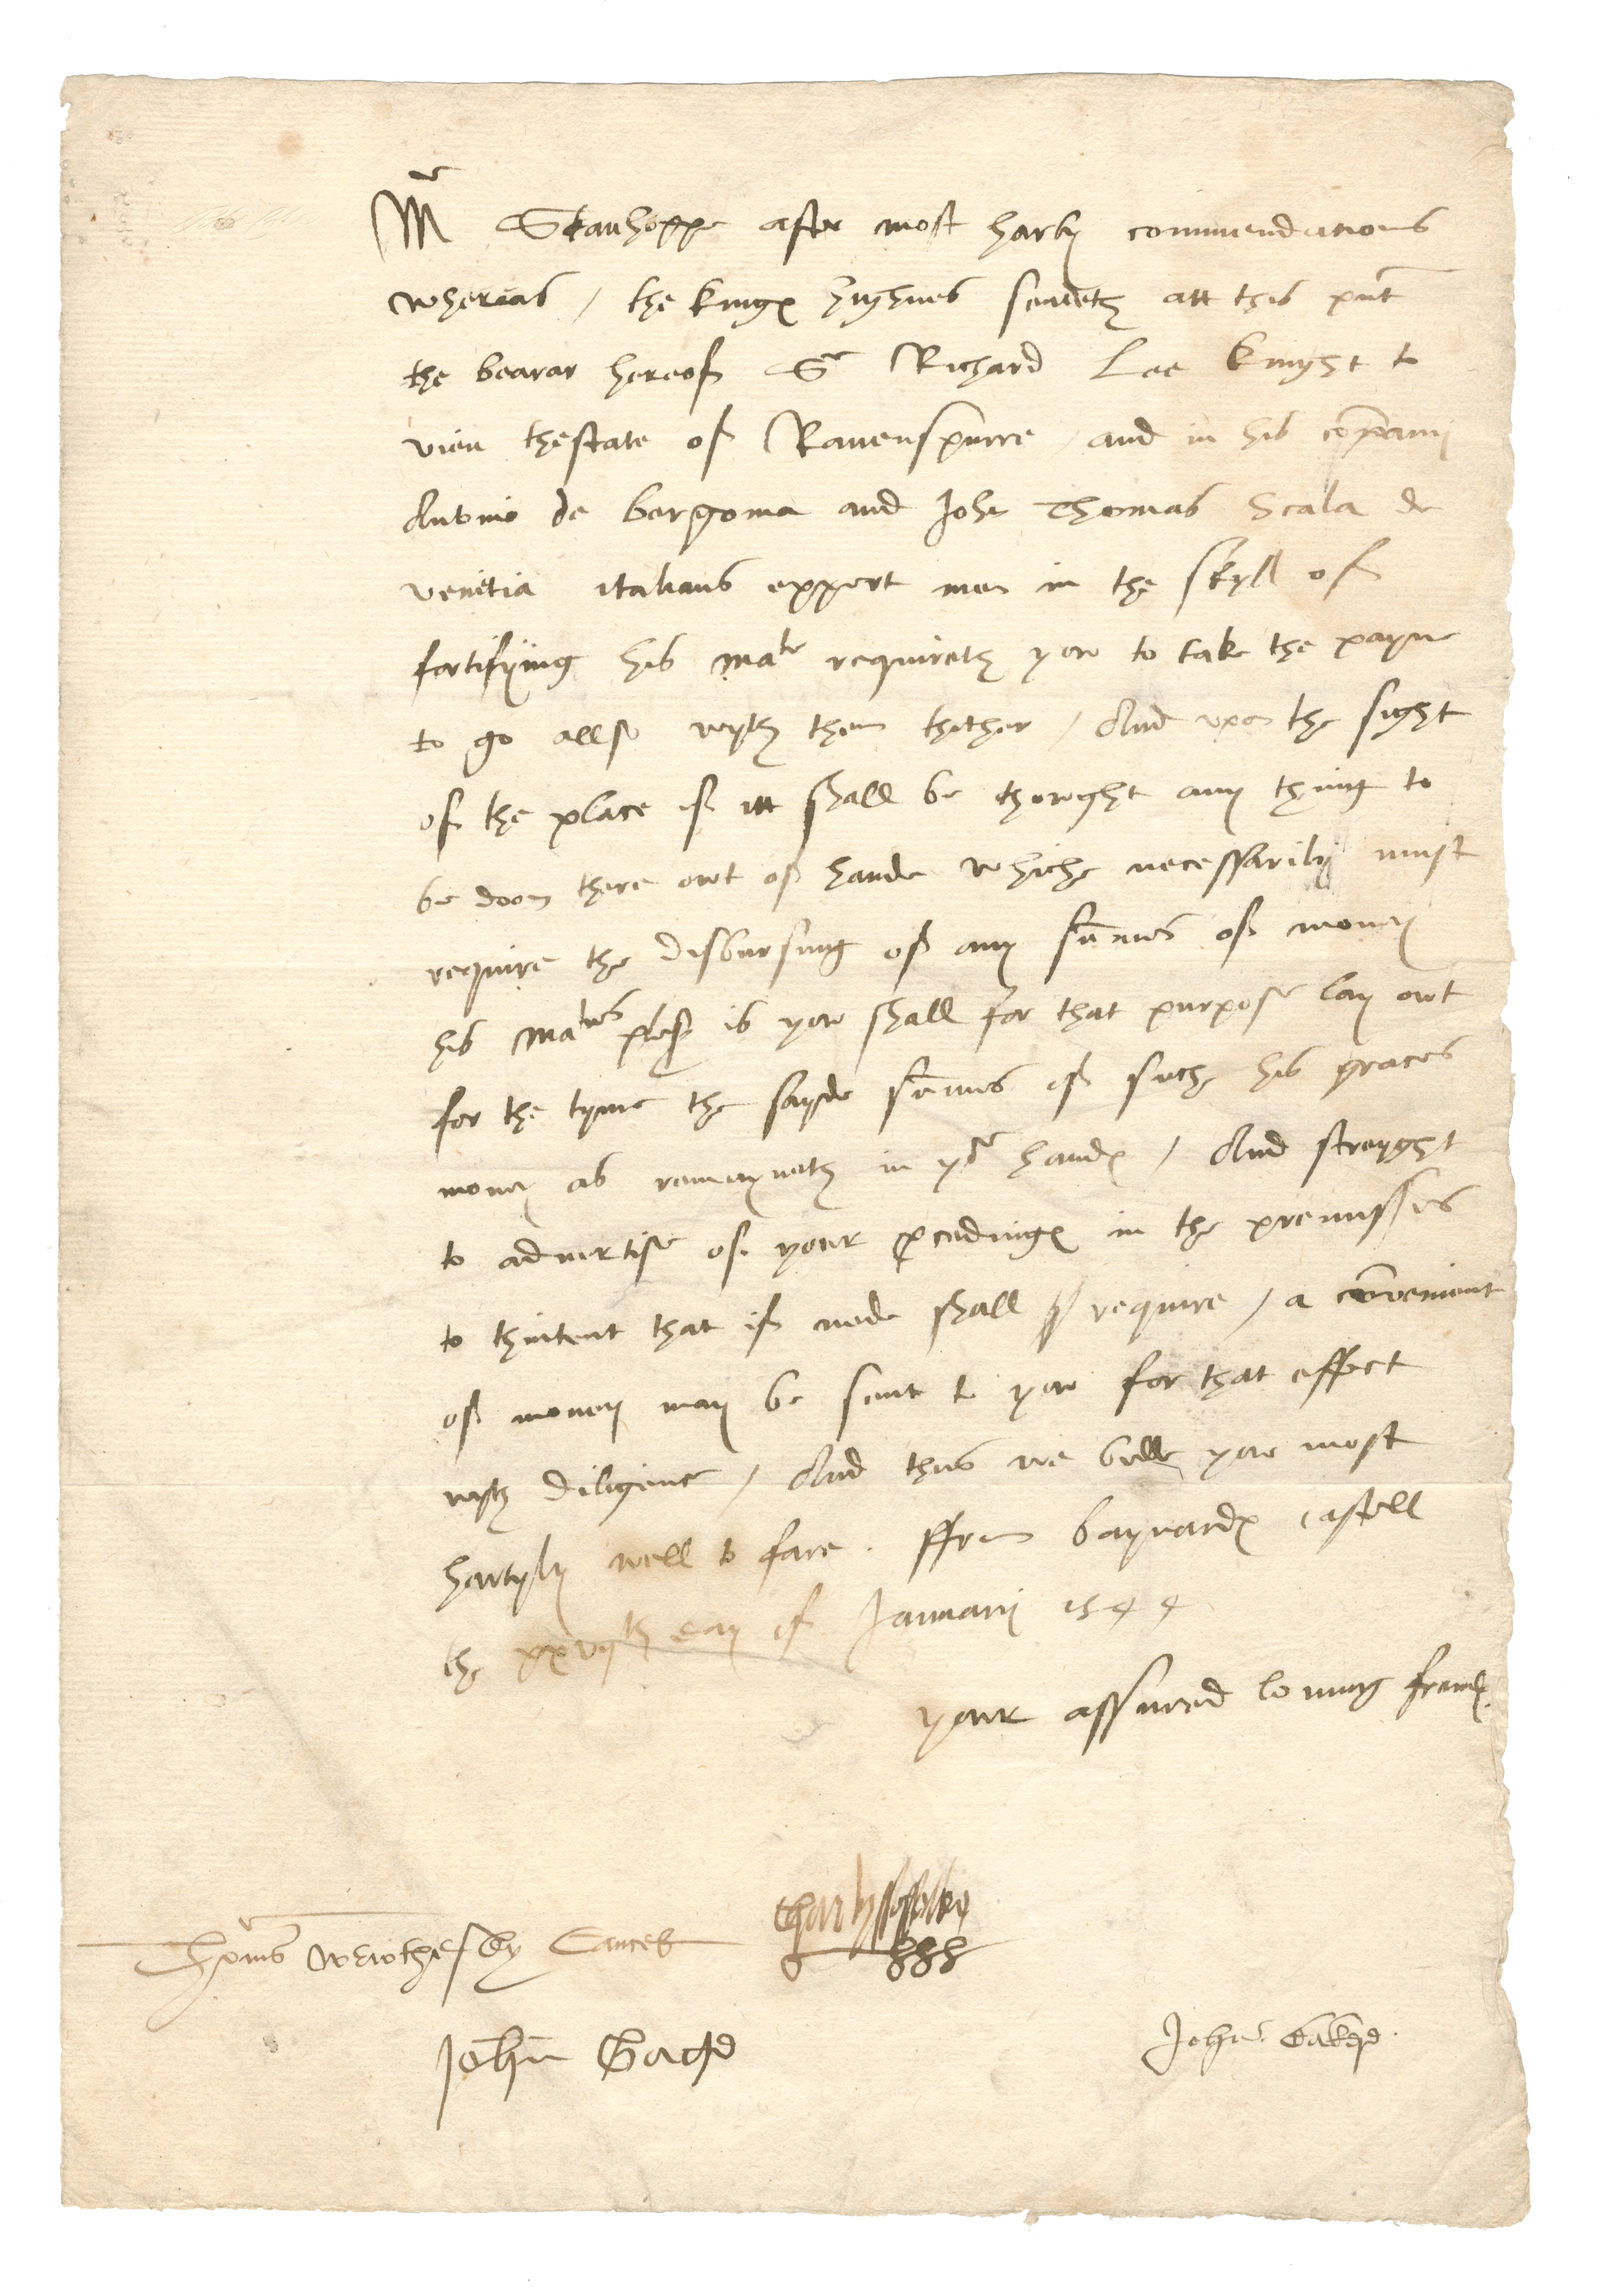 HENRY VIII &#8211; MINISTERS OF STATE Letter signed by Henry VIII's ministers of state, Baynard'...